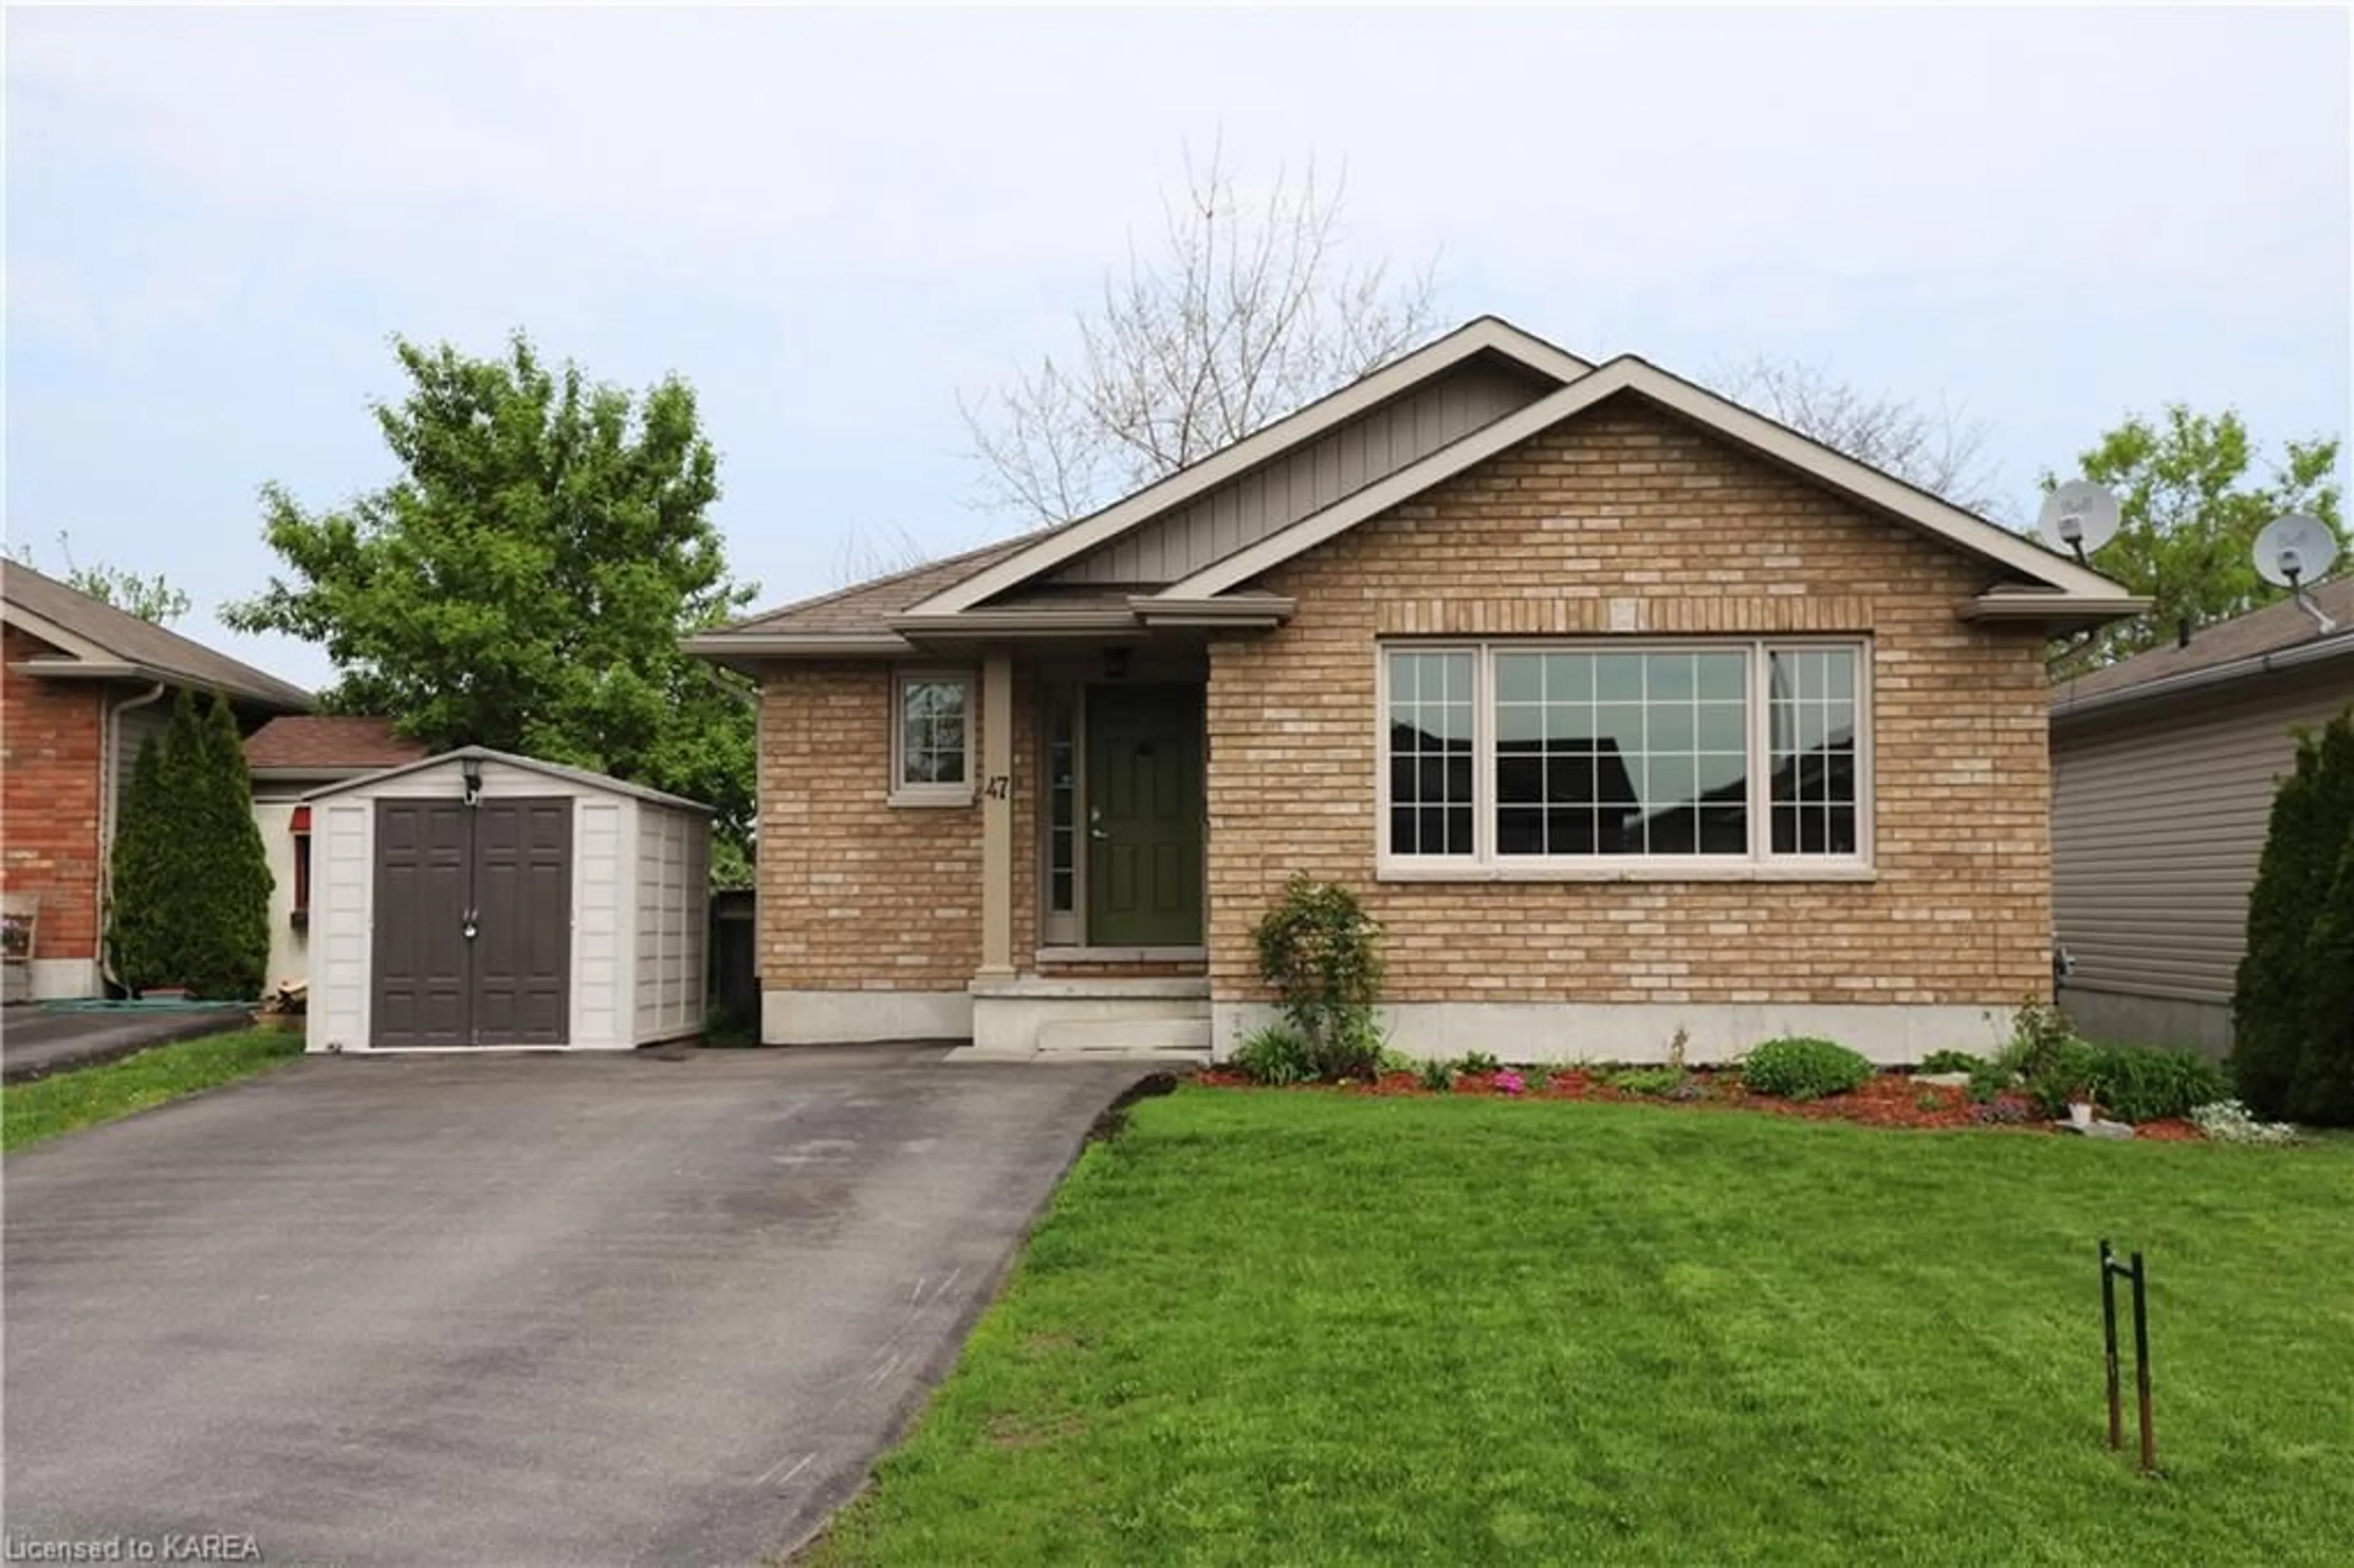 Home with brick exterior material for 47 Follwell Cres, Belleville Ontario K8N 5Z6